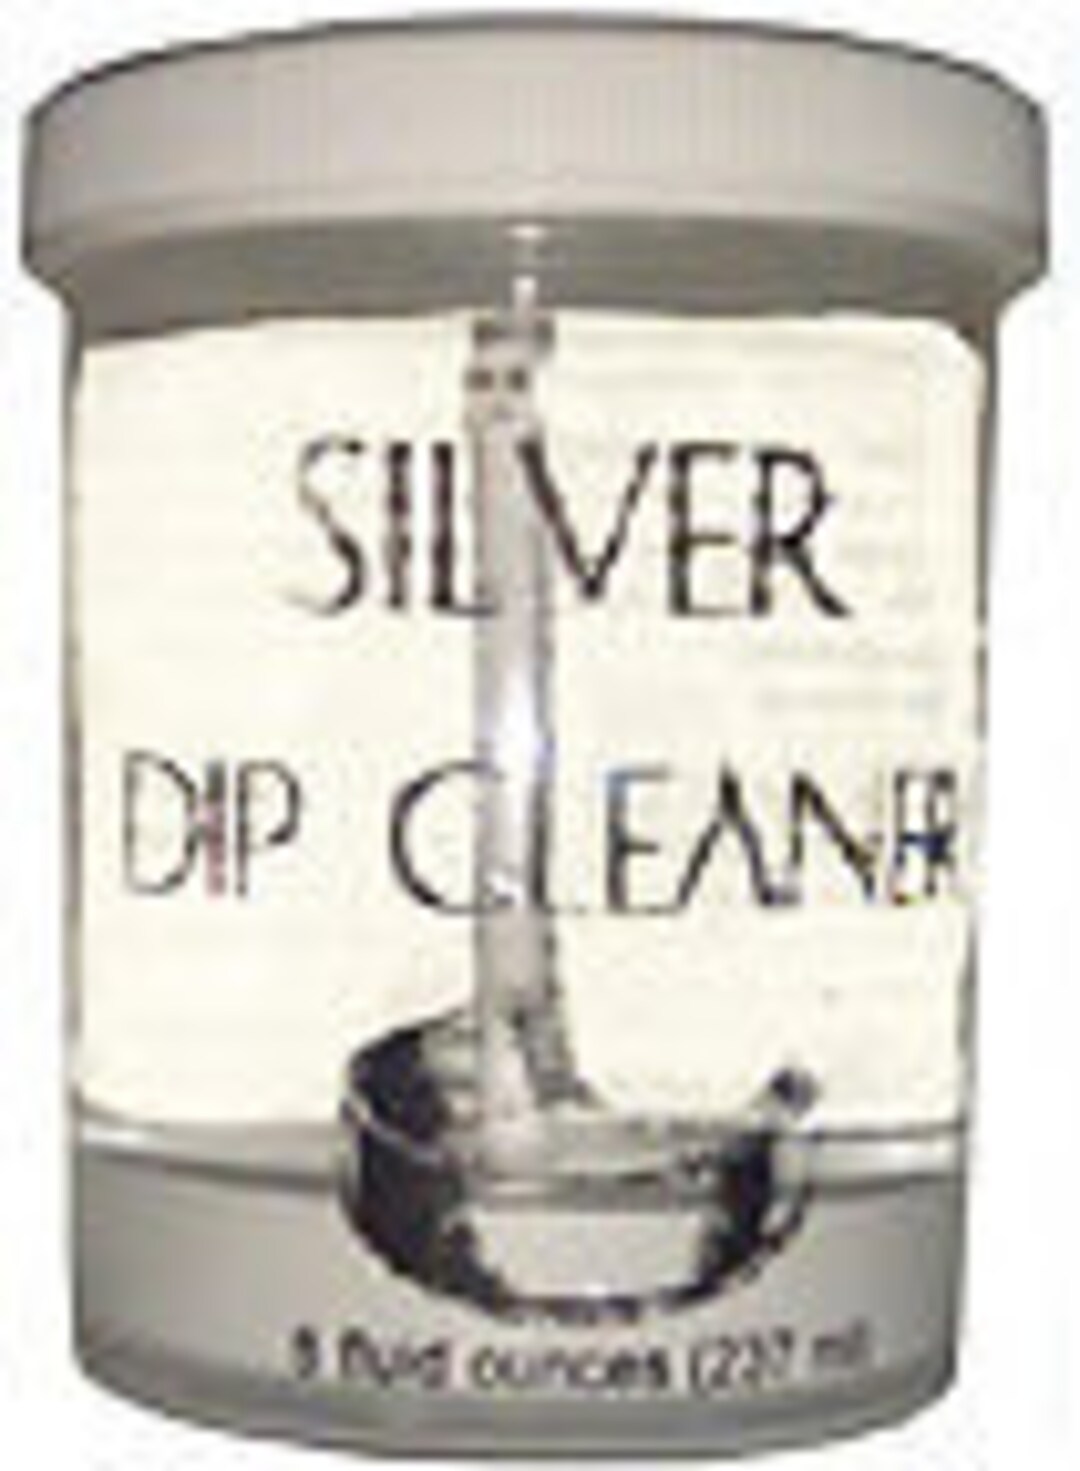 JSP Silver Jewelry Dip Cleaner Solution